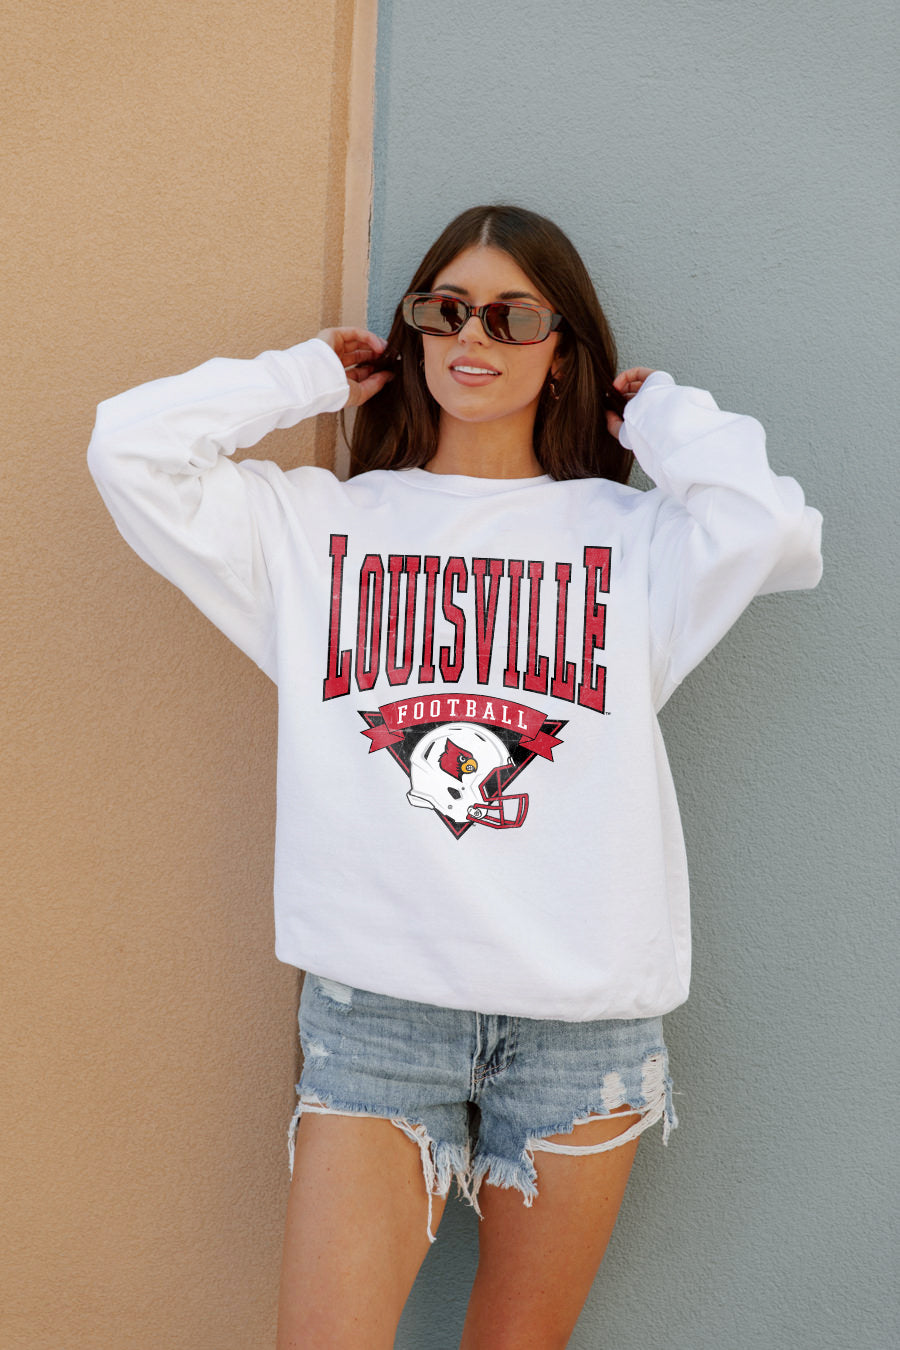 LOUISVILLE CARDINALS SLOW MOTION CLASSIC CREW FLEECE PULLOVER BY MADI –  GAMEDAY COUTURE